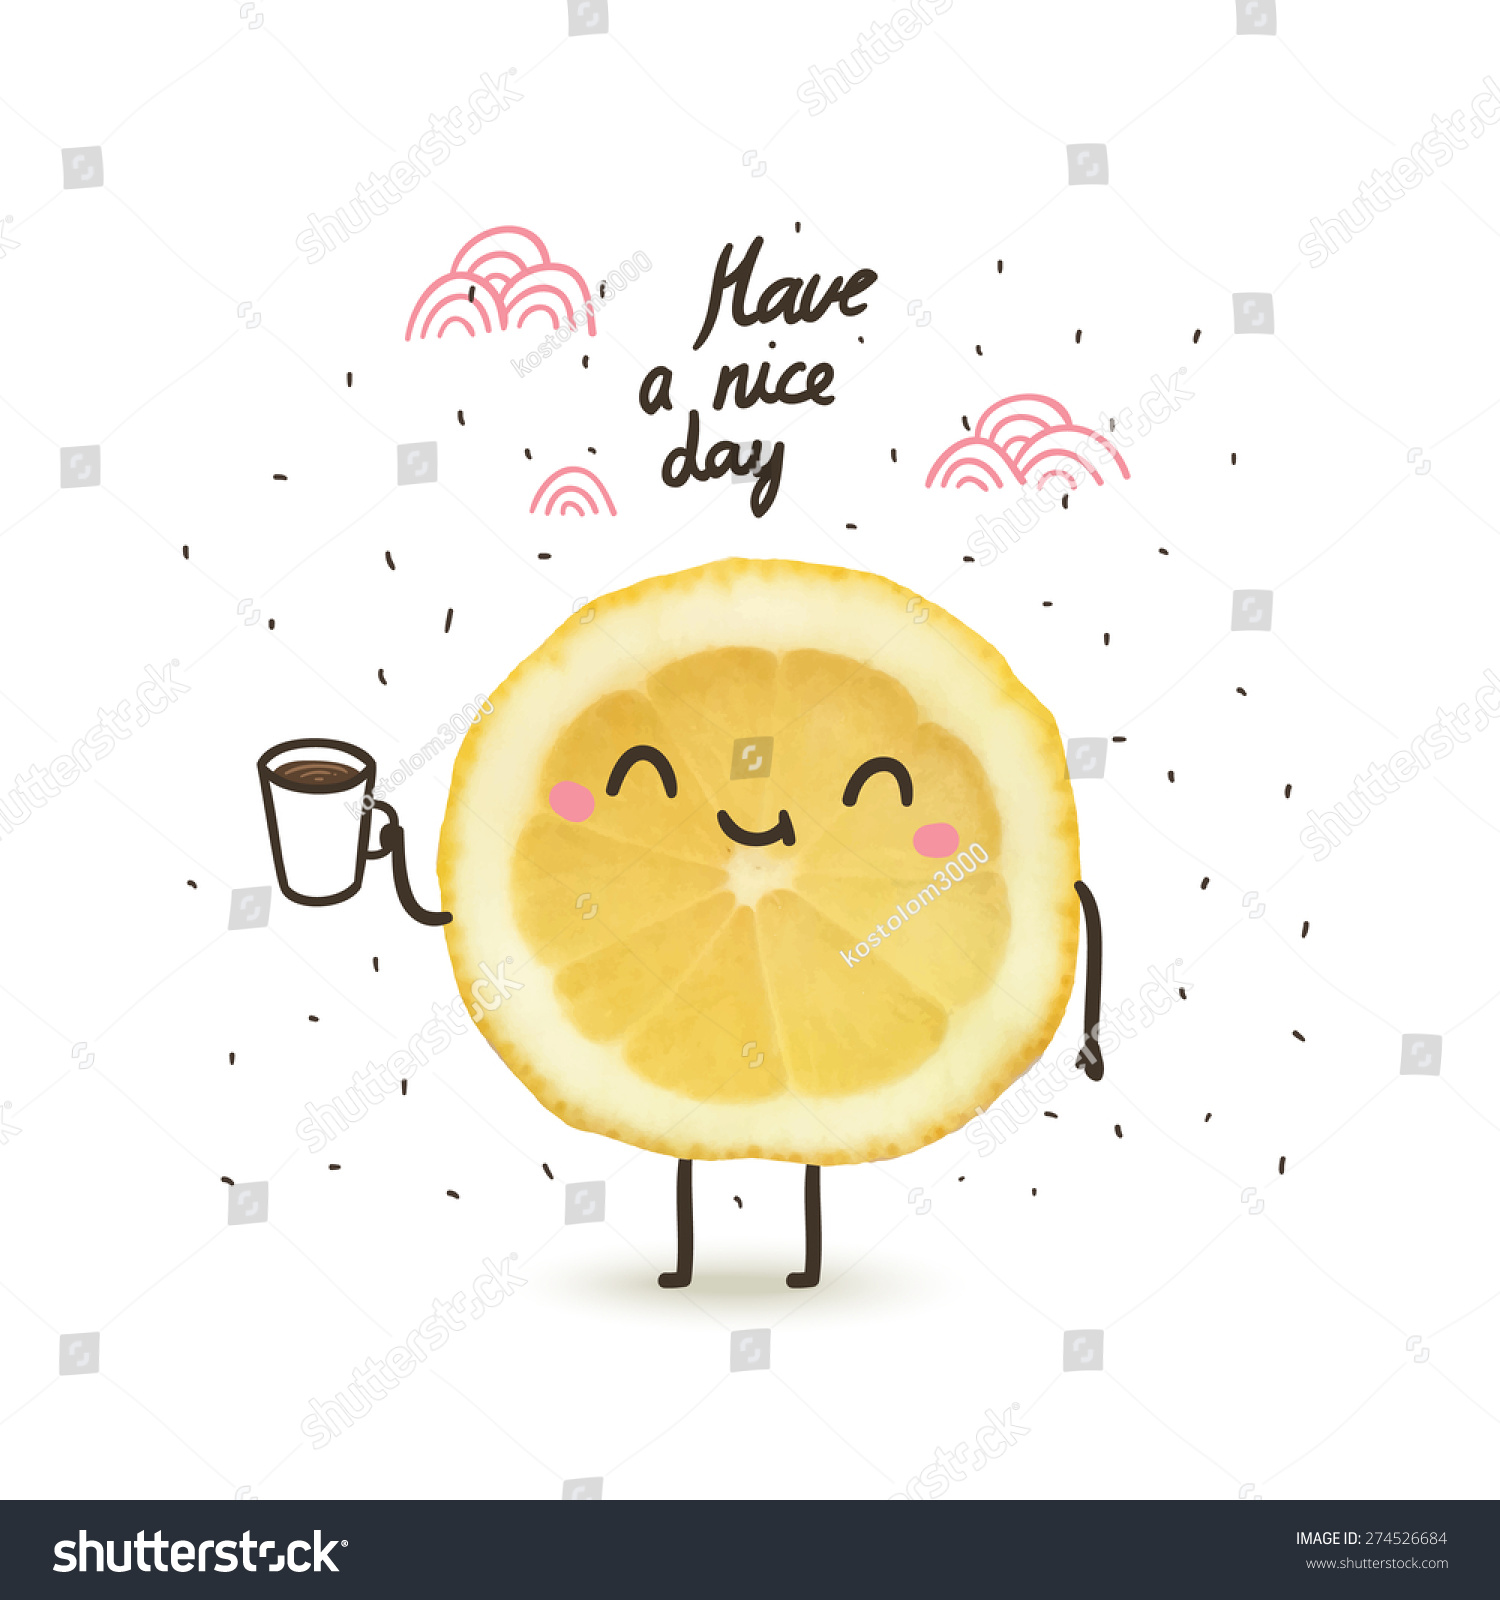 Have Nice Day Cute Funny Cartoon Stock Vector Royalty Free 274526684